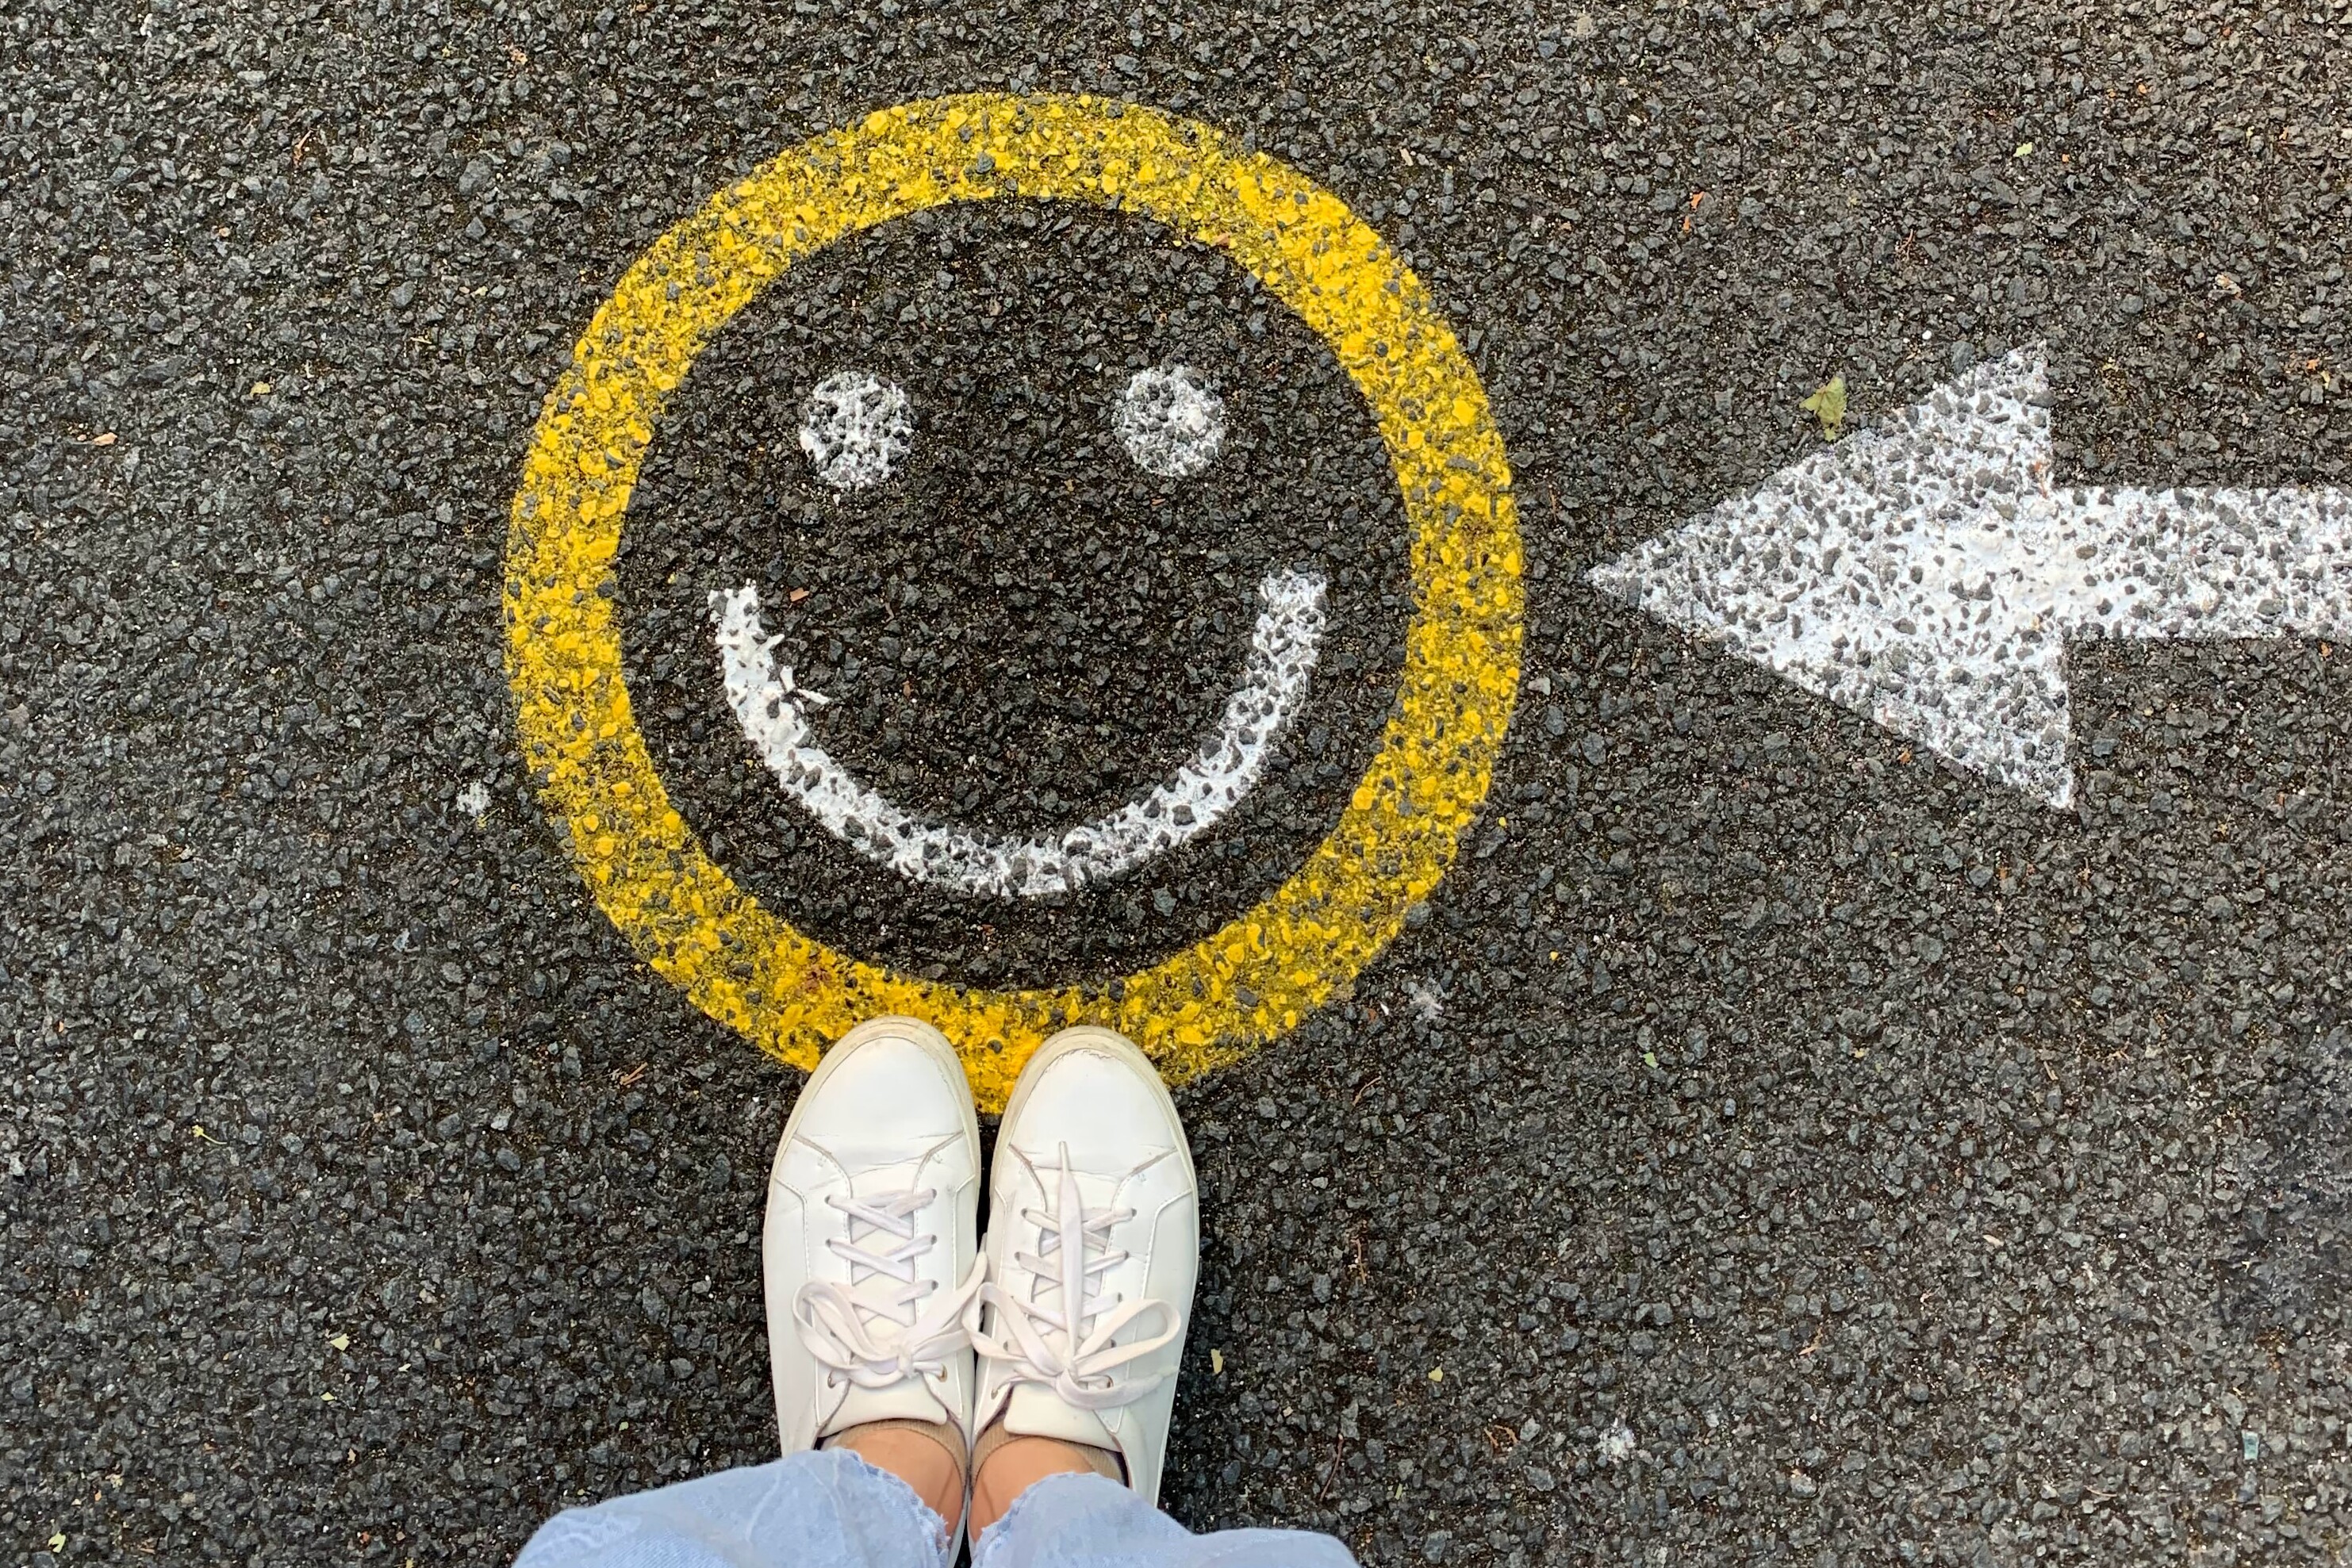 smiley face painted on the road